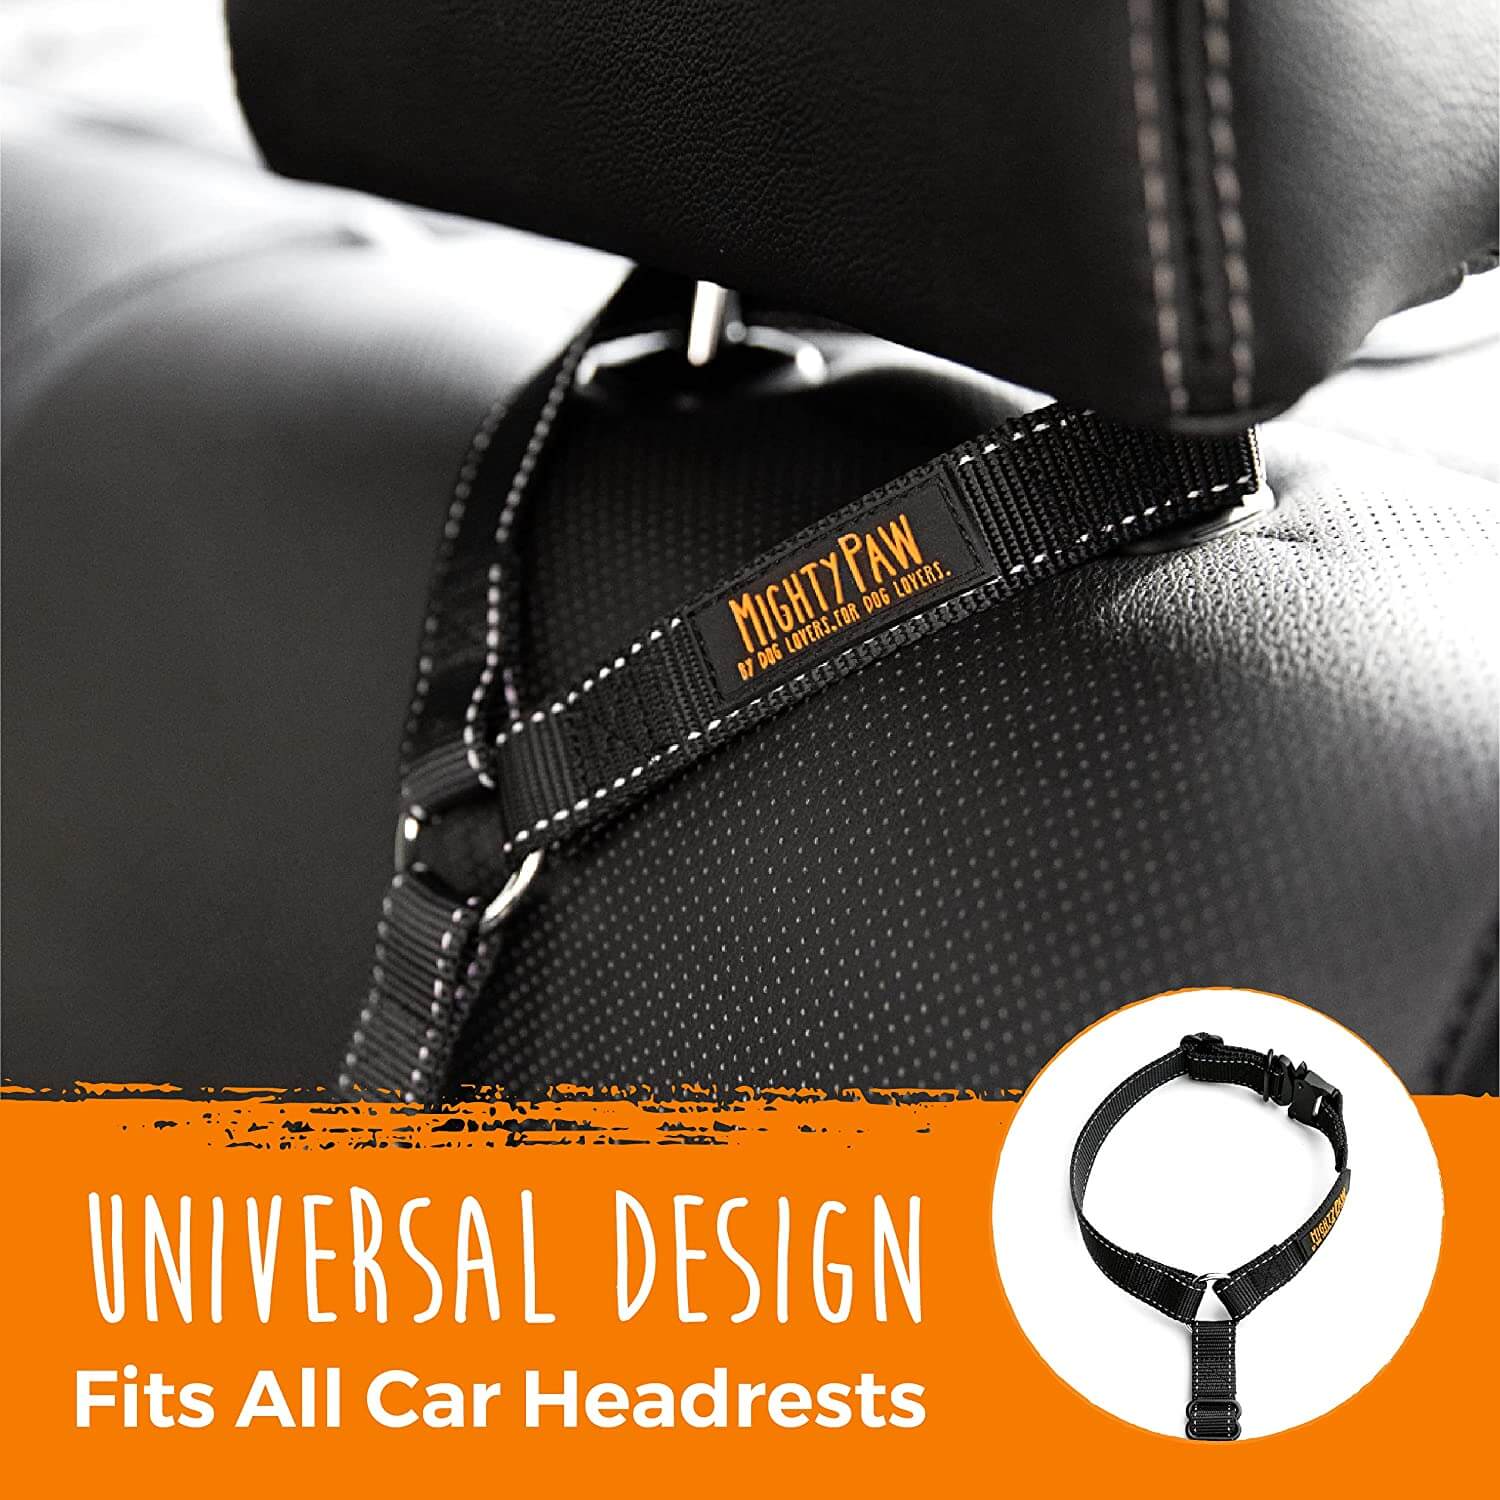 Keep Your Dog Safe on the Road with Mighty Paw Car Headrest Dog Seat Belt